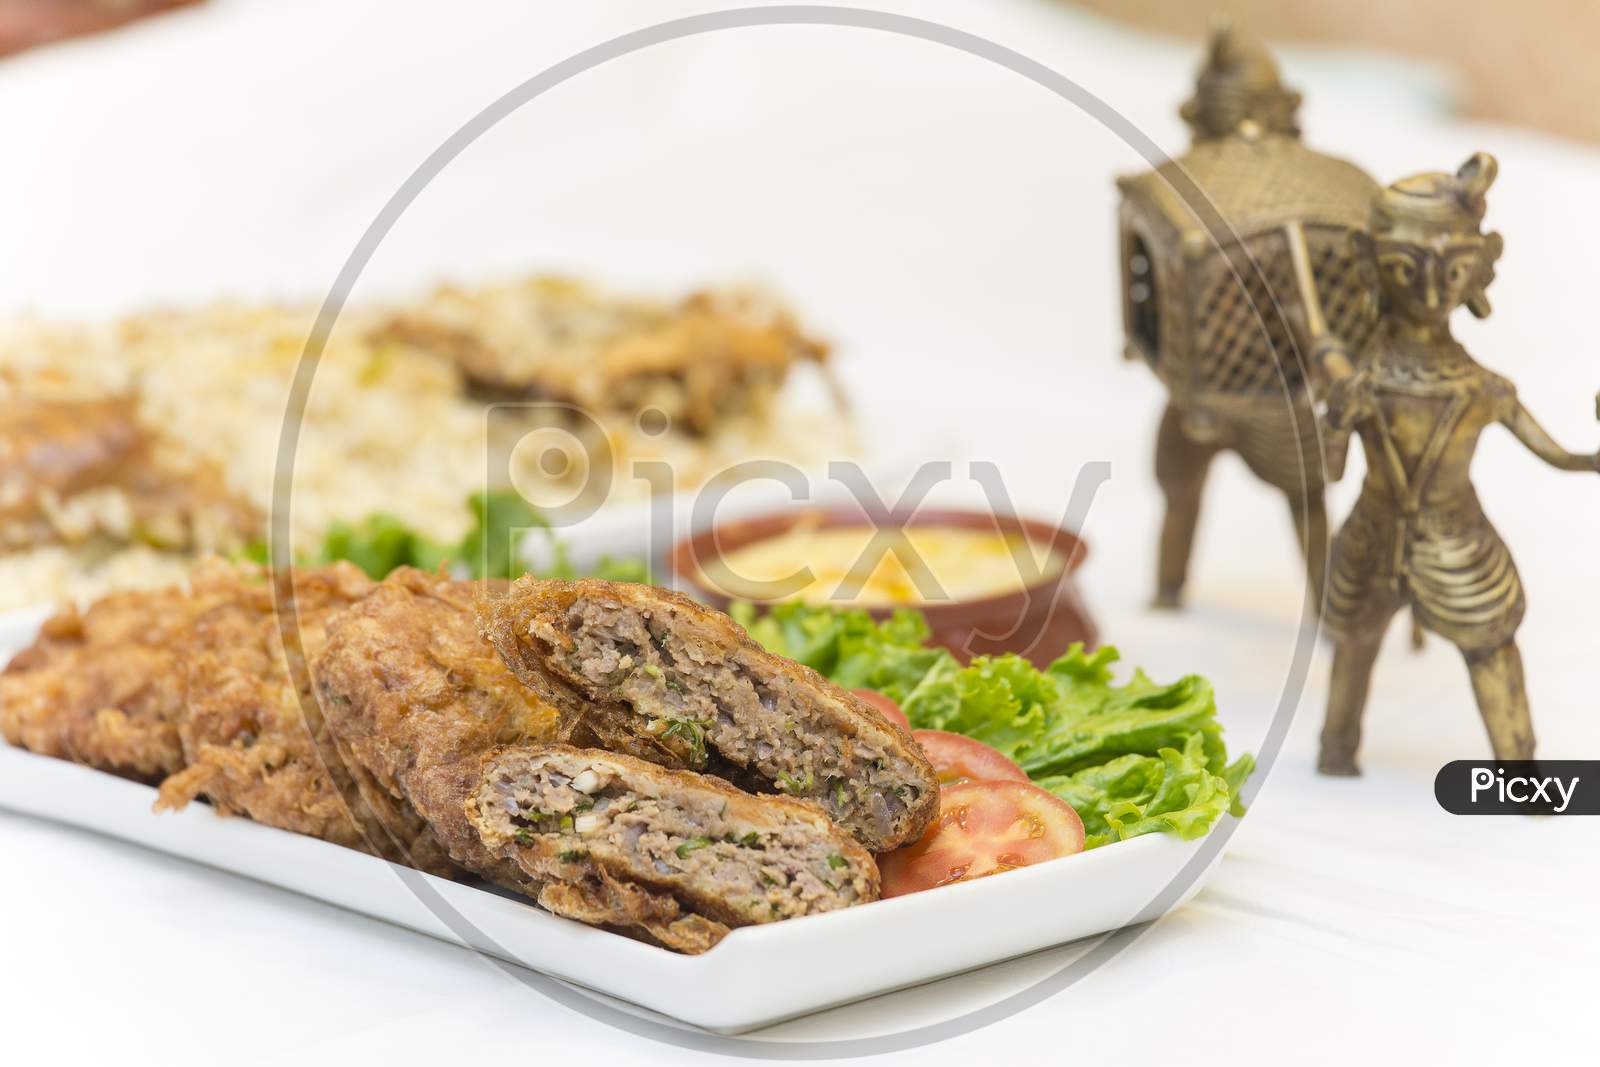 Nawabi Food – Mutton Tikka Kebabs. These Types Of Food Are Too Flavorful And Delicious.